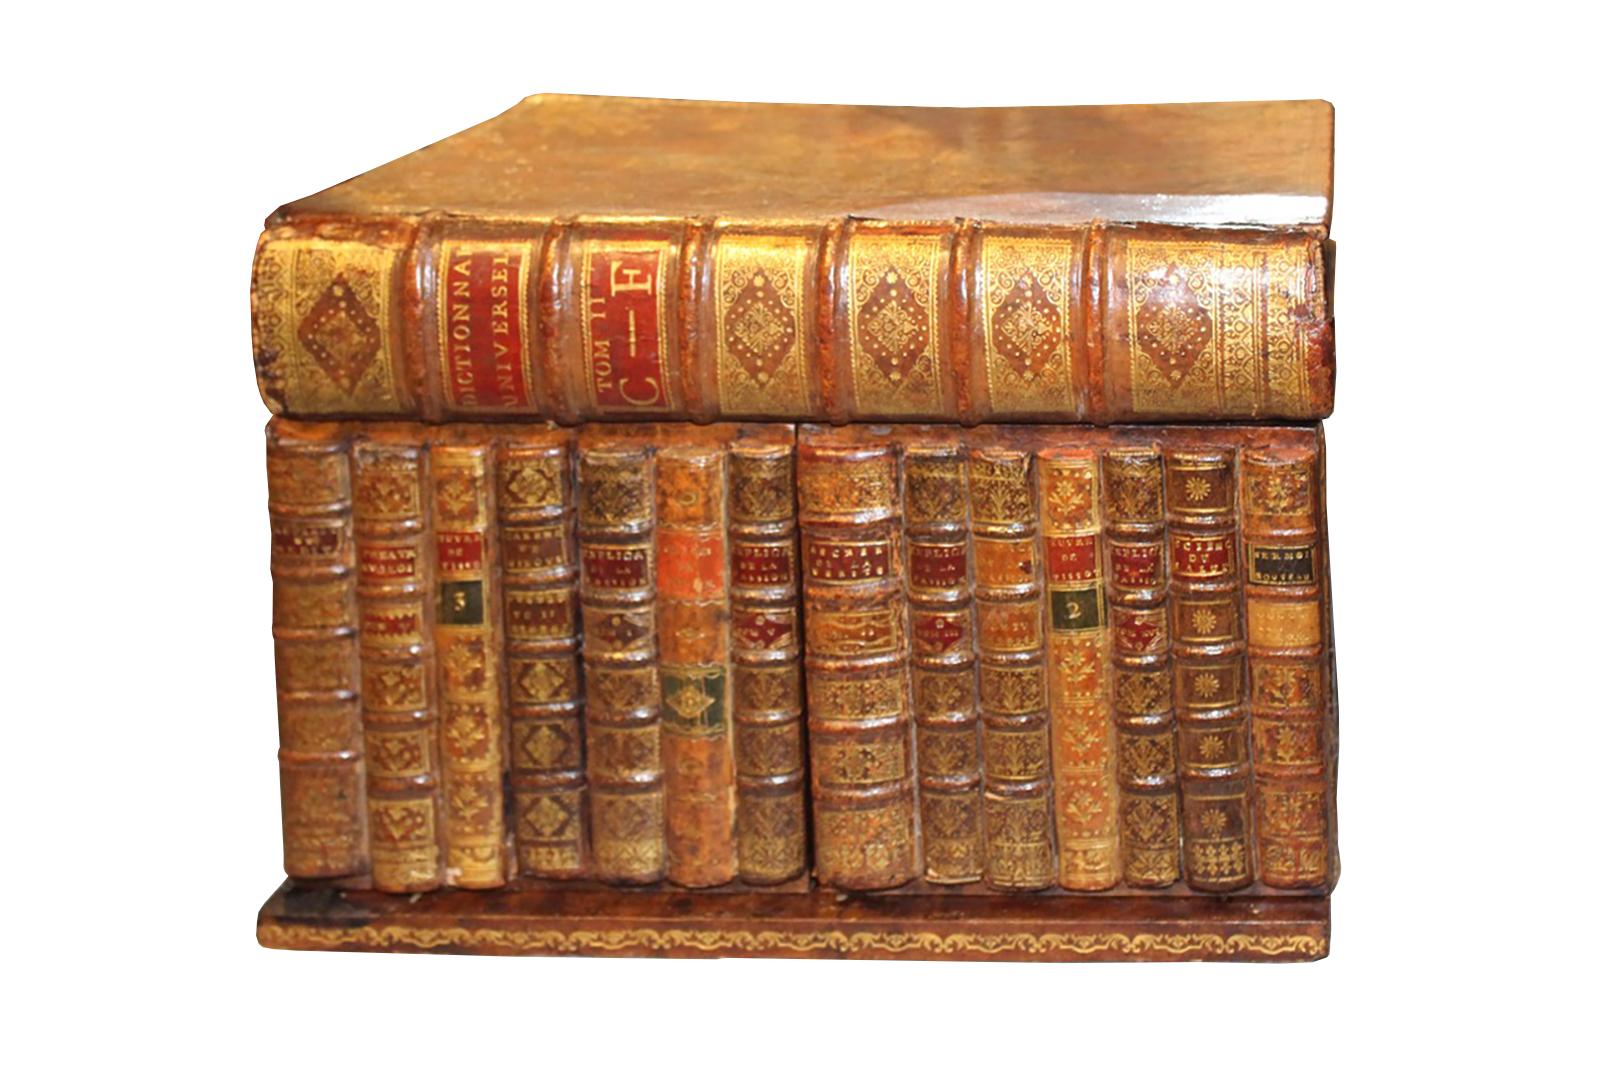 This 19th century tantalus is designed to look like a row of 14 leather bound books, covered by a large book stacked on top. Each book features different decorative detailing. This piece is made of mahogany, and includes an internal lift-out tray